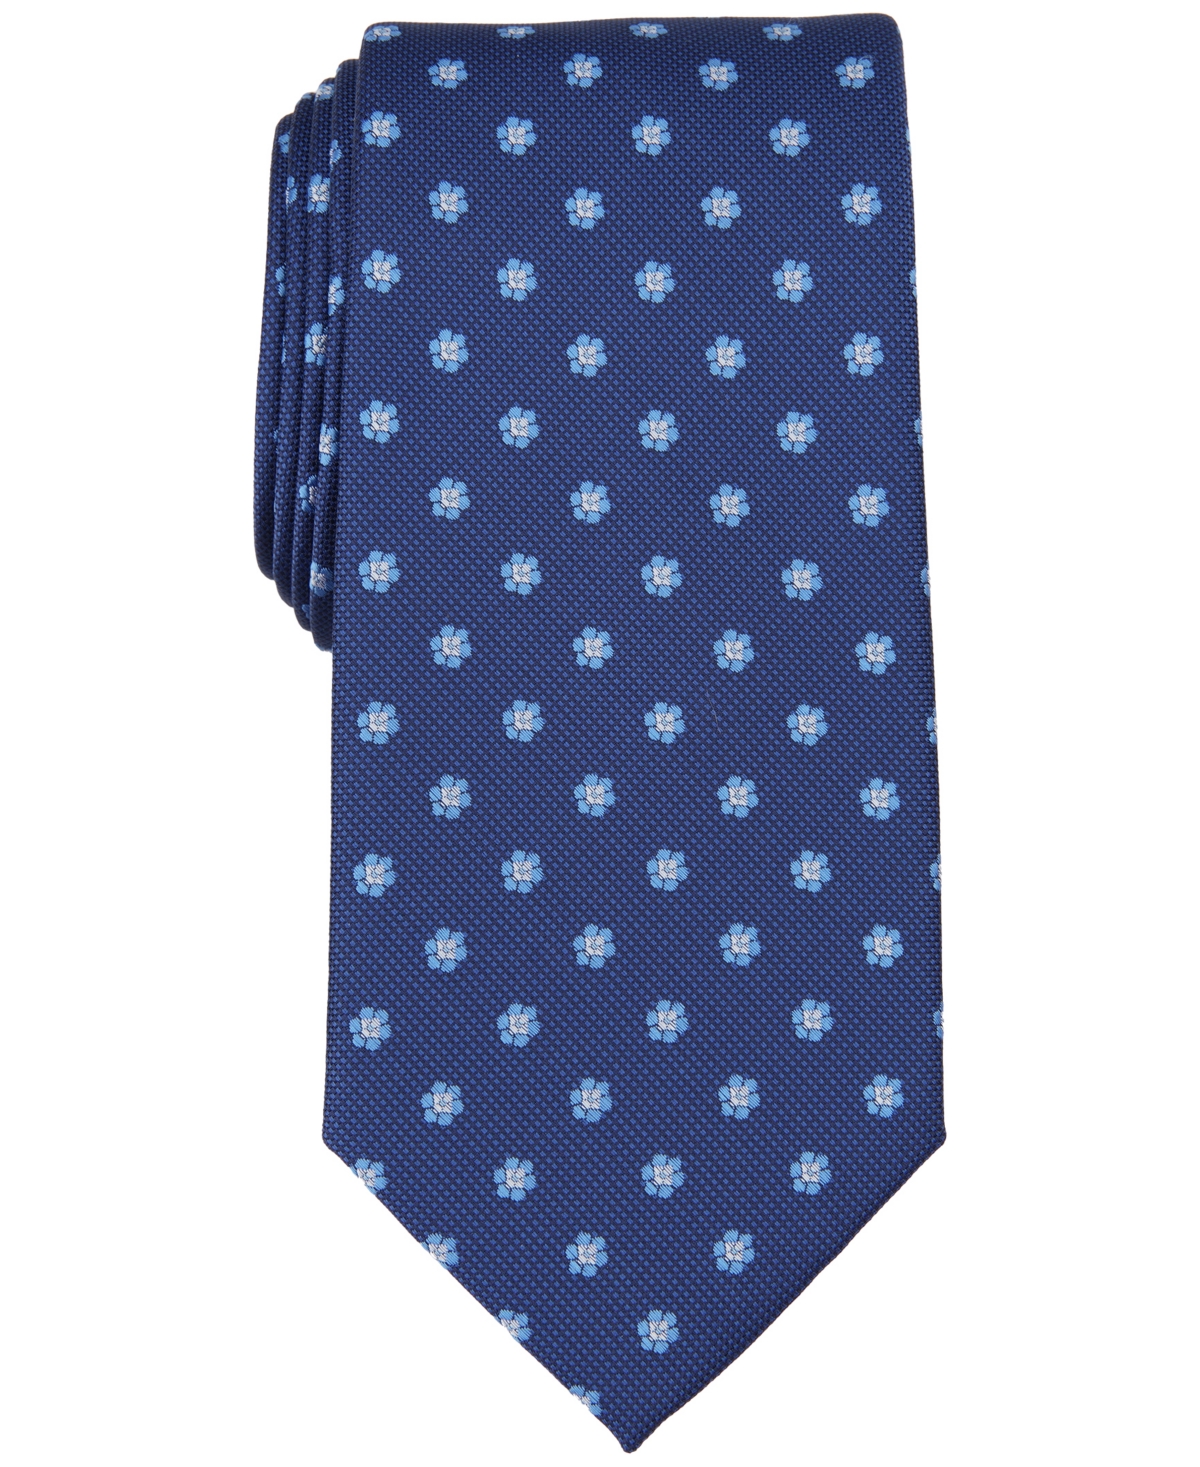 Men's Burnell Classic Floral Neat Tie, Created for Macy's - Navy